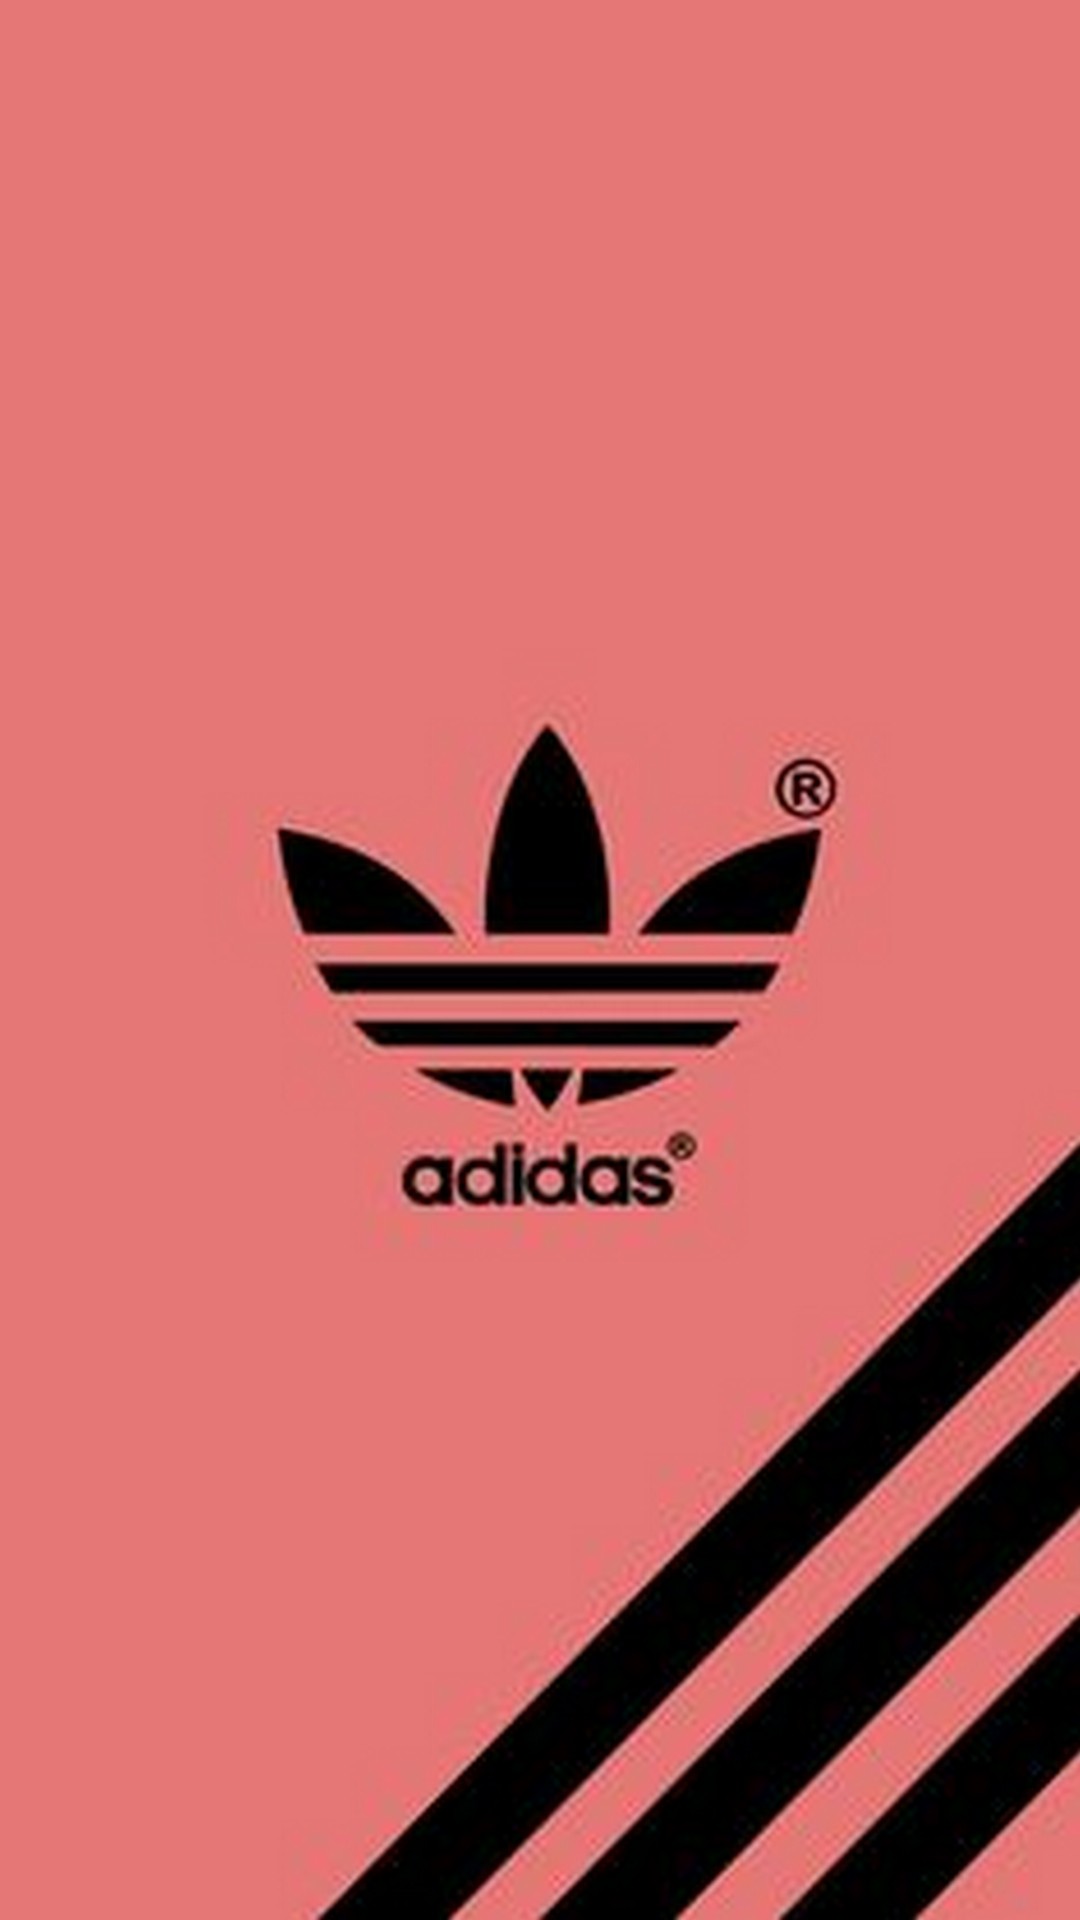 Adidas iPhone Wallpaper HD With high-resolution 1080X1920 pixel. You can set as wallpaper for Apple iPhone X, XS Max, XR, 8, 7, 6, SE, iPad. Enjoy and share your favorite HD wallpapers and background images